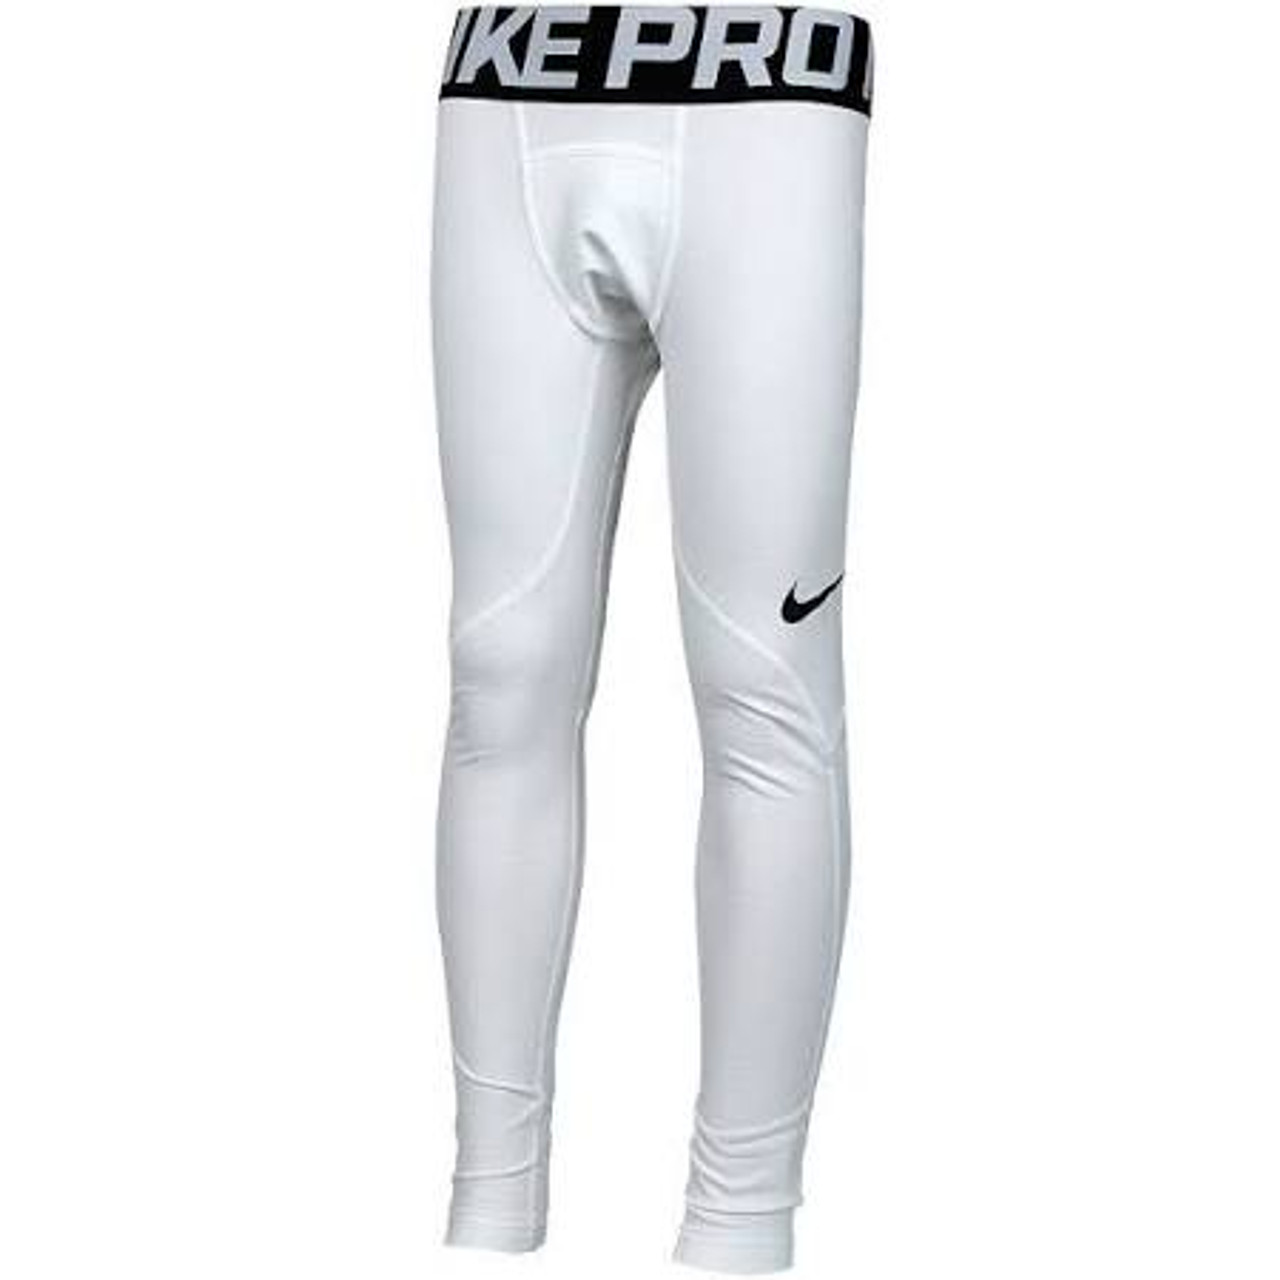 Nike Pro Youth Compression Pants, 47% OFF